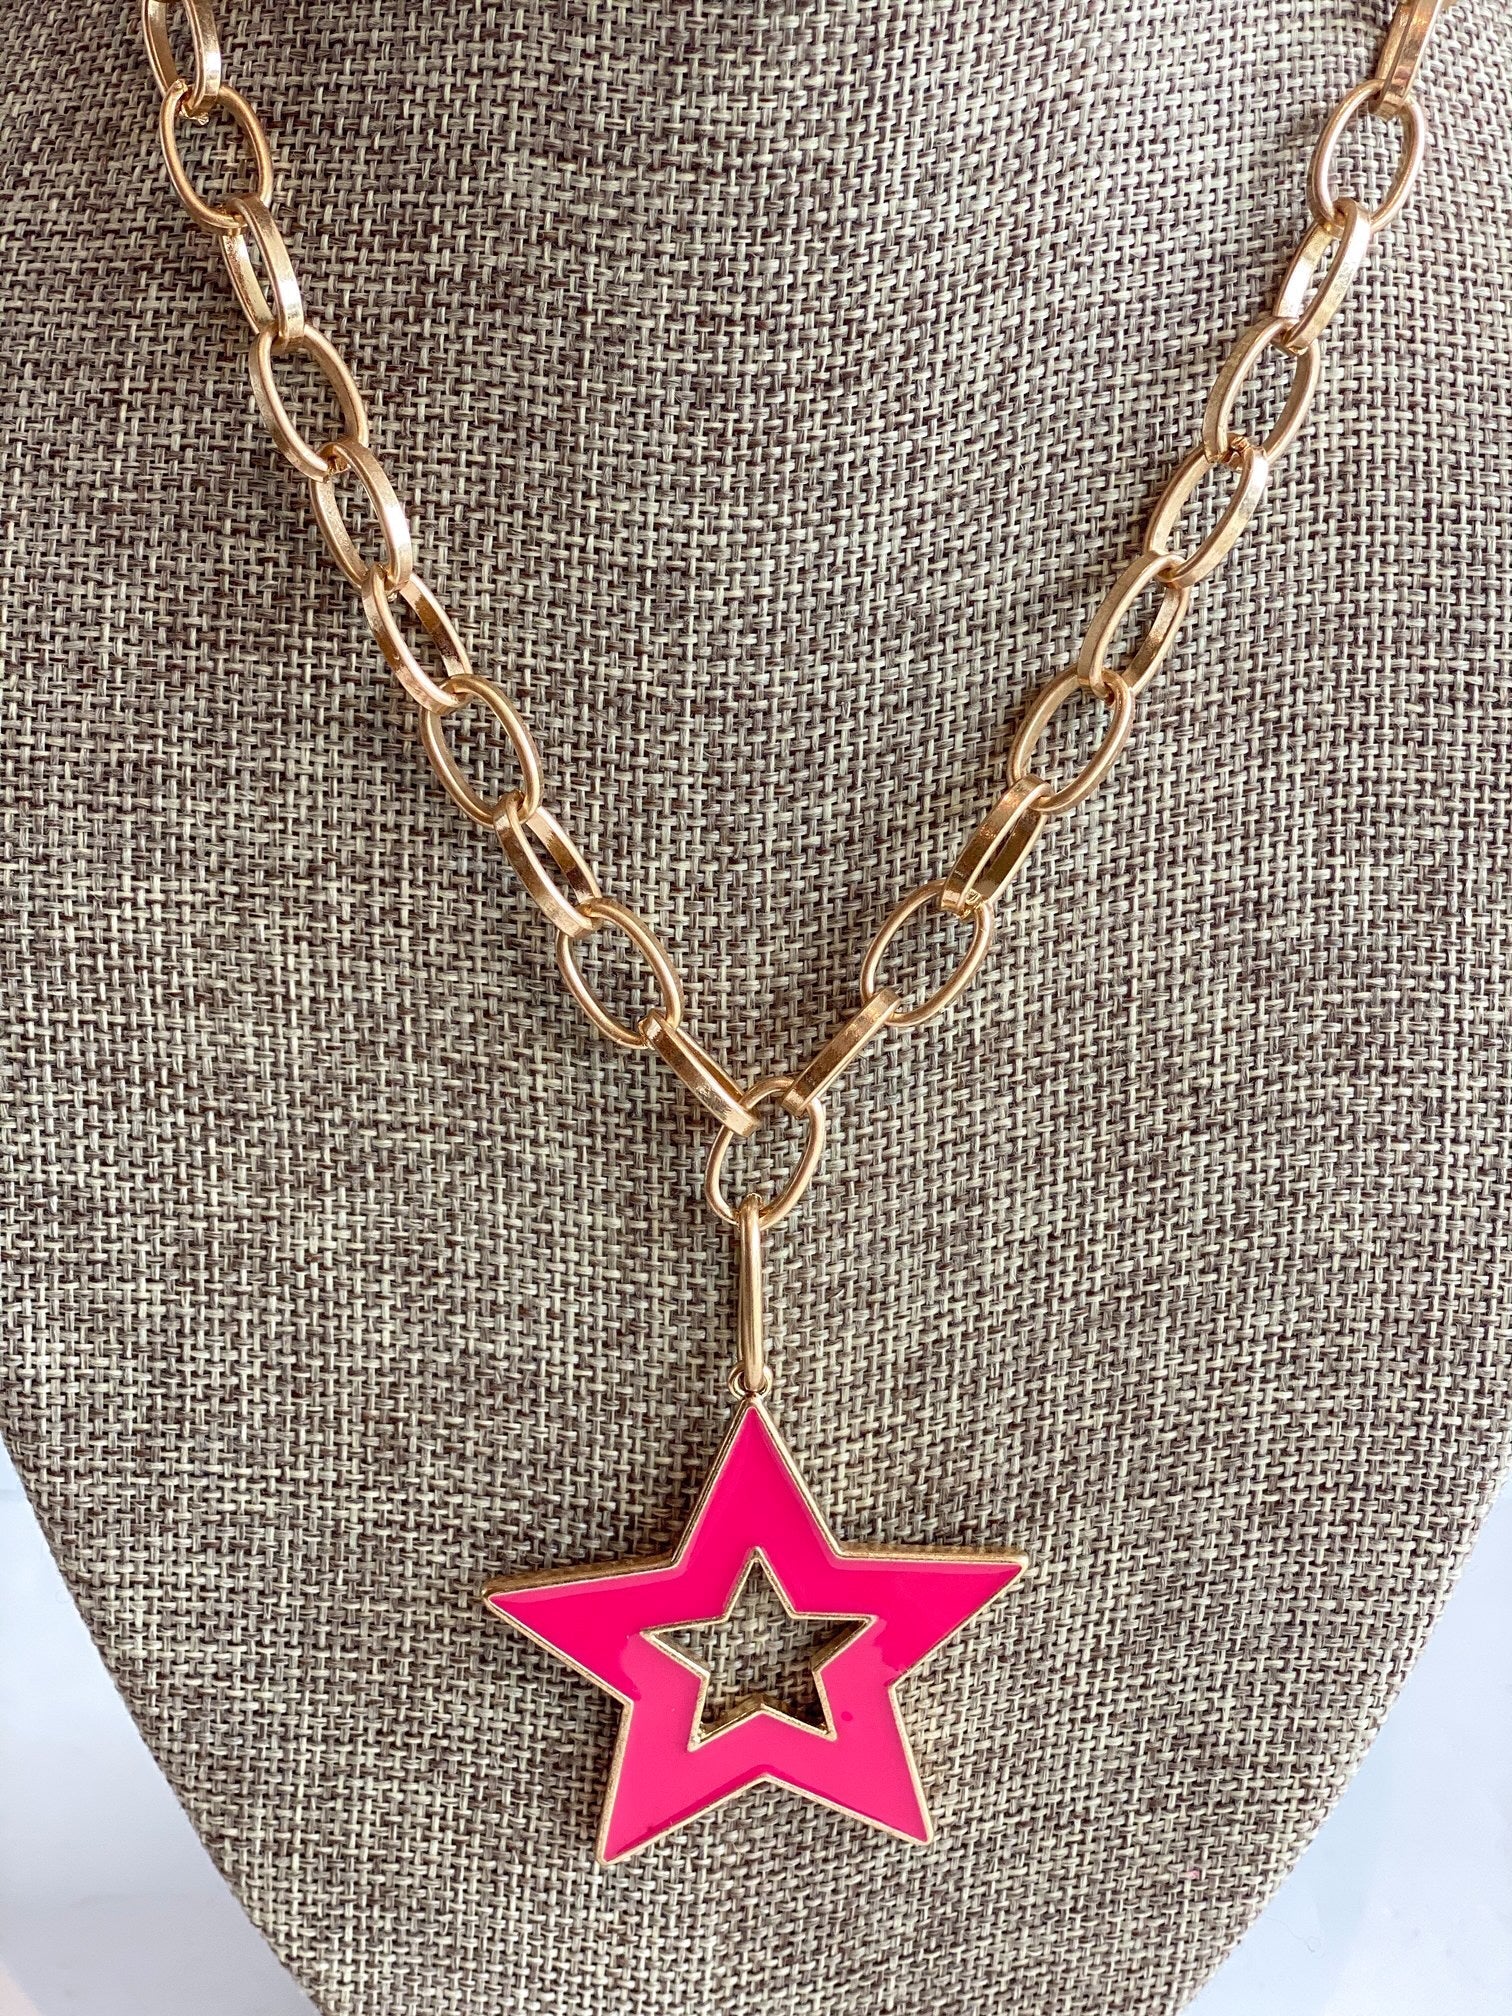 pink star necklace 